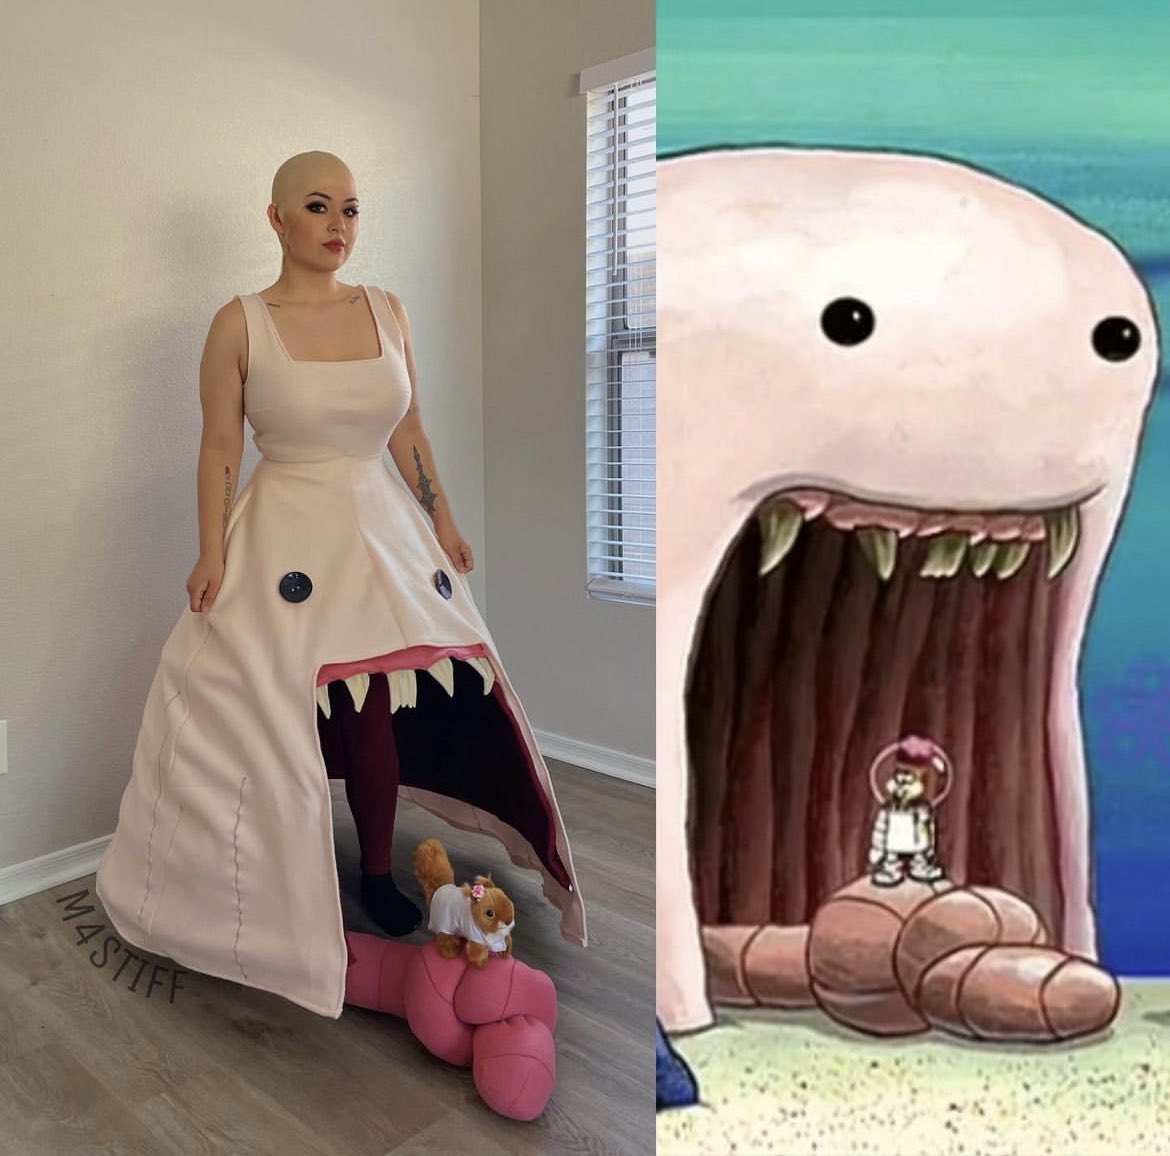 my alaskan bullworm cosplay is going nuclear viral on ig and fb with zero credit🫠 so if you wanna support the original creator here i am!!